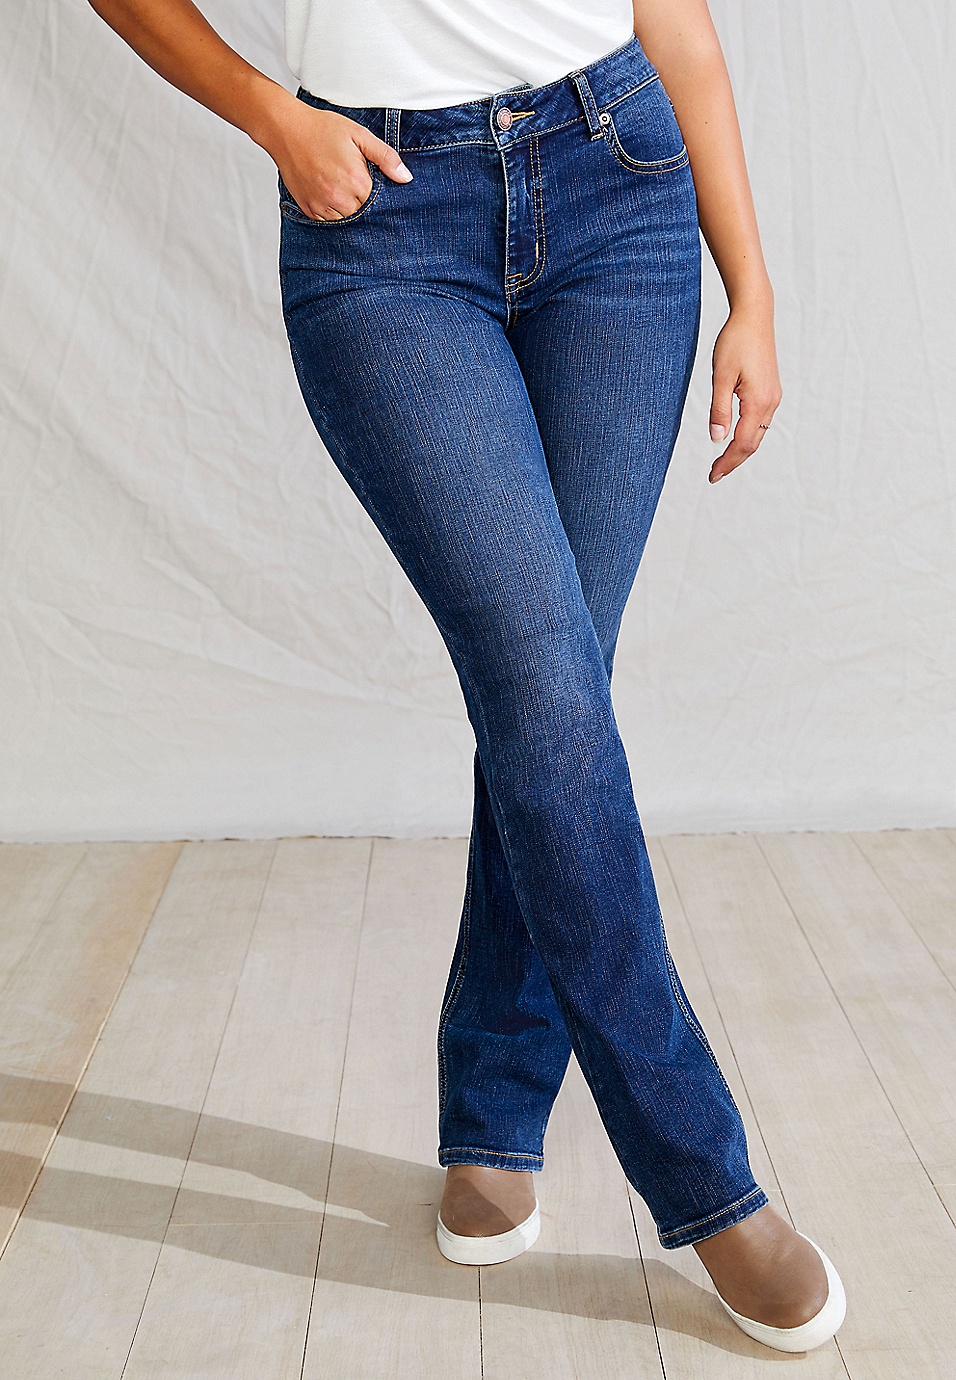 These Jeans were made for Curves